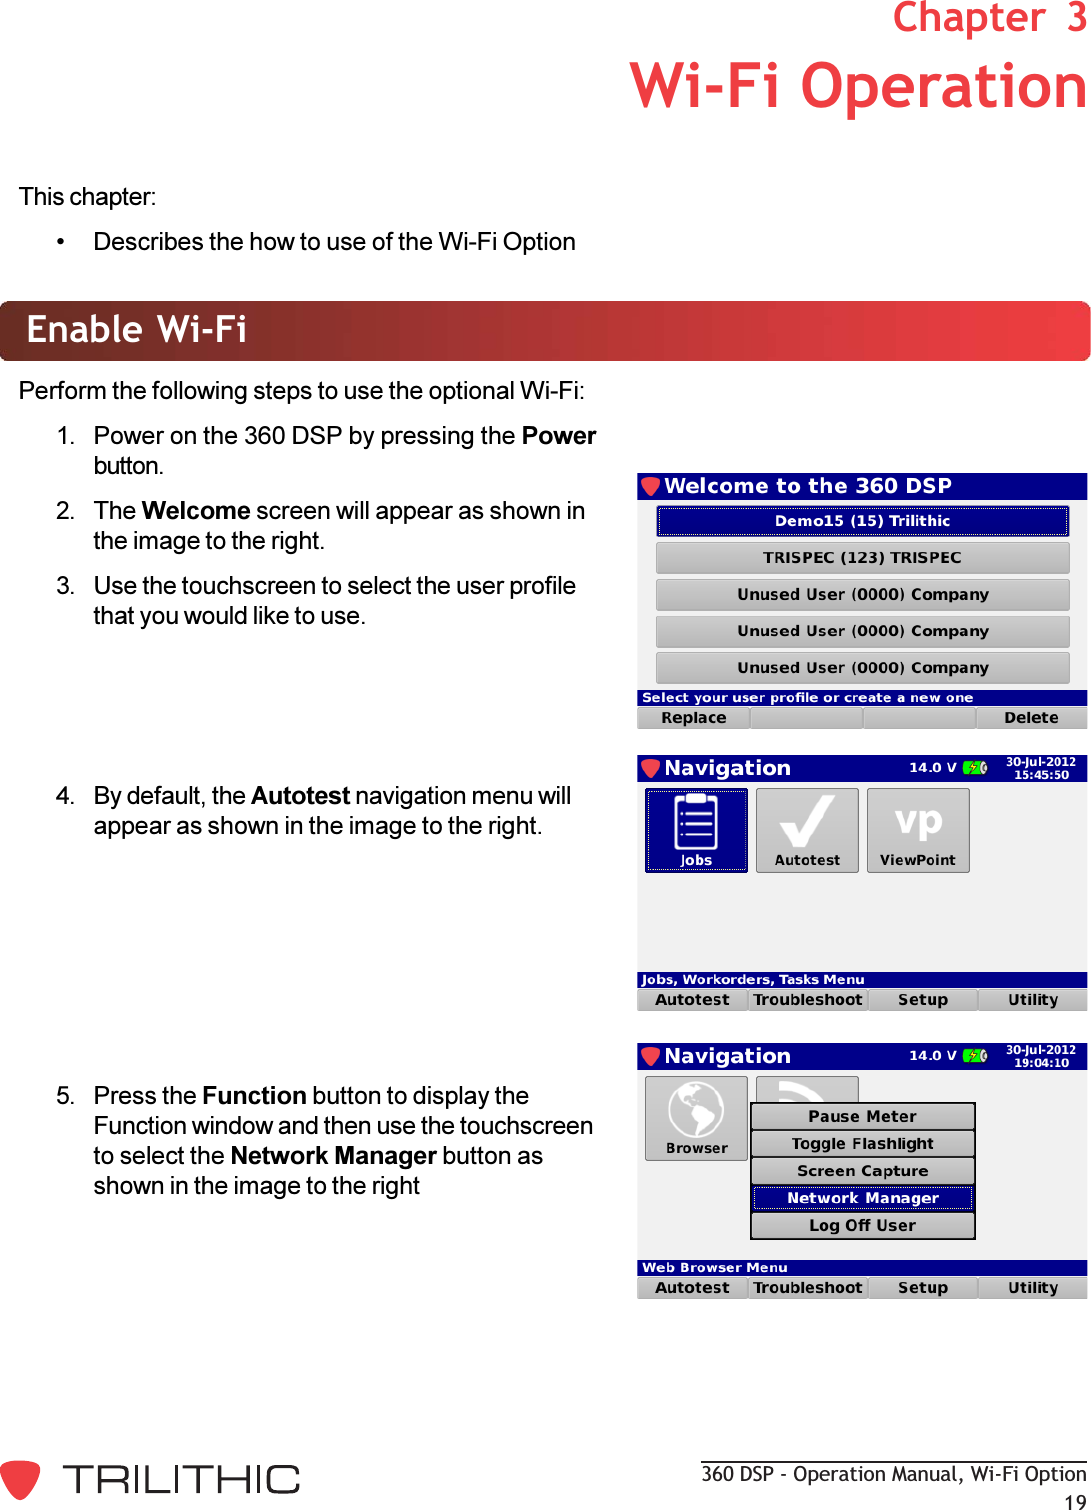 360 DSP - Operation Manual, Wi-Fi Option193. Wi-Fi OperationChapter  3This chapter: Describes the how to use of the Wi-Fi OptionEnable Wi-FiPerform the following steps to use the optional Wi-Fi:1. Power on the 360 DSP by pressing the Powerbutton.2. The Welcome screen will appear as shown inthe image to the right.3. Use the touchscreen to select the user profilethat you would like to use.4. By default, the Autotest navigation menu willappear as shown in the image to the right.5. Press the Function button to display theFunction window and then use the touchscreento select the Network Manager button asshown in the image to the right